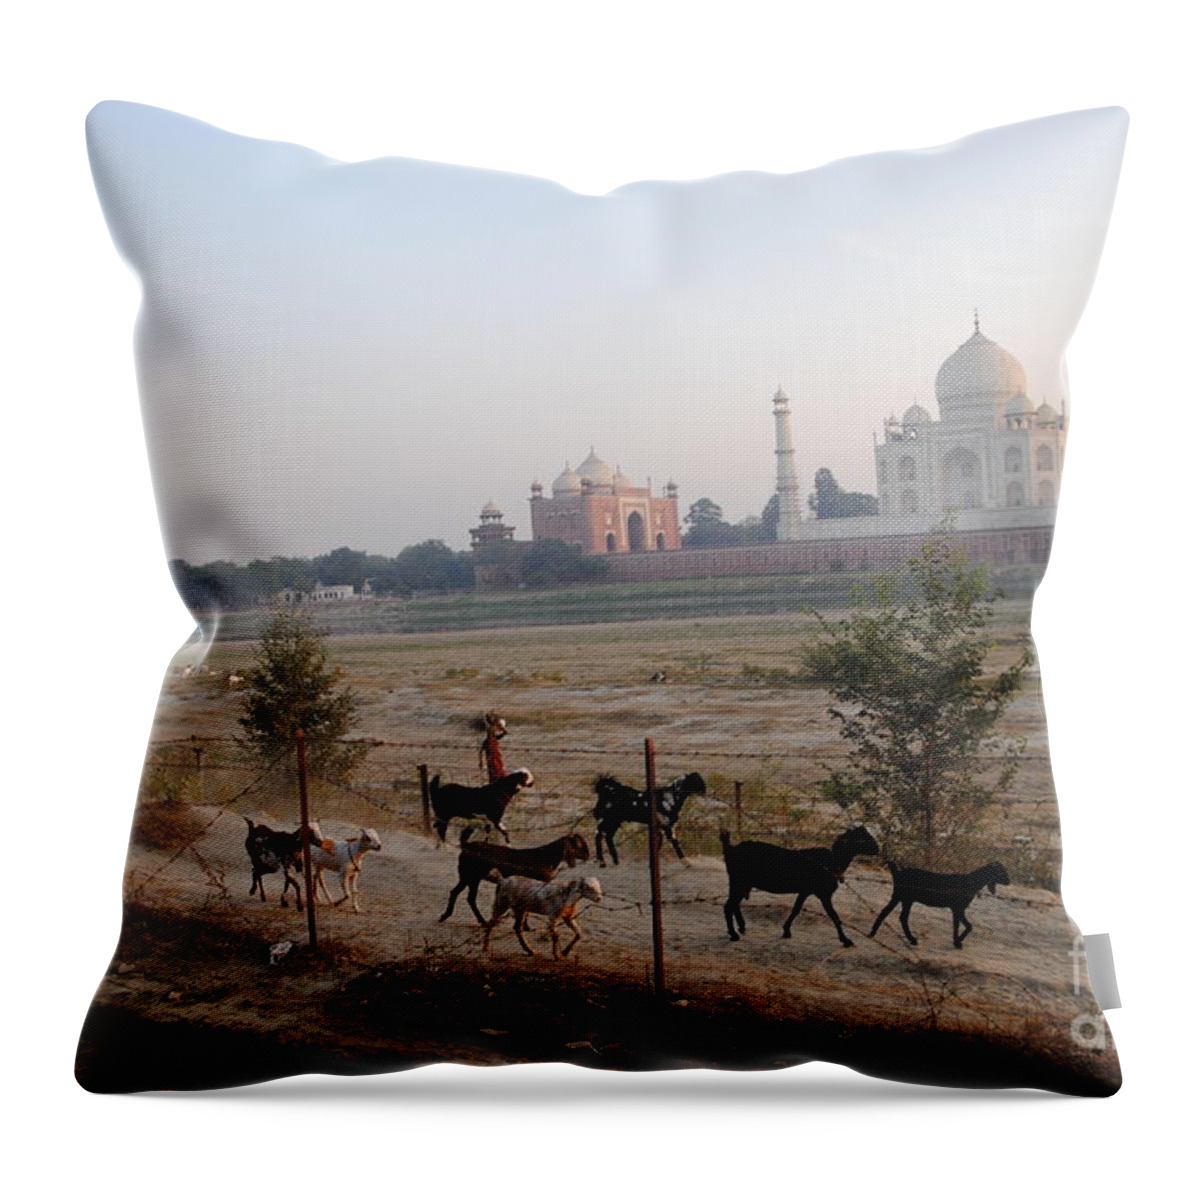 Taj Mahal Throw Pillow featuring the photograph End of the Day at Mehtab Bagh by Jacqueline M Lewis